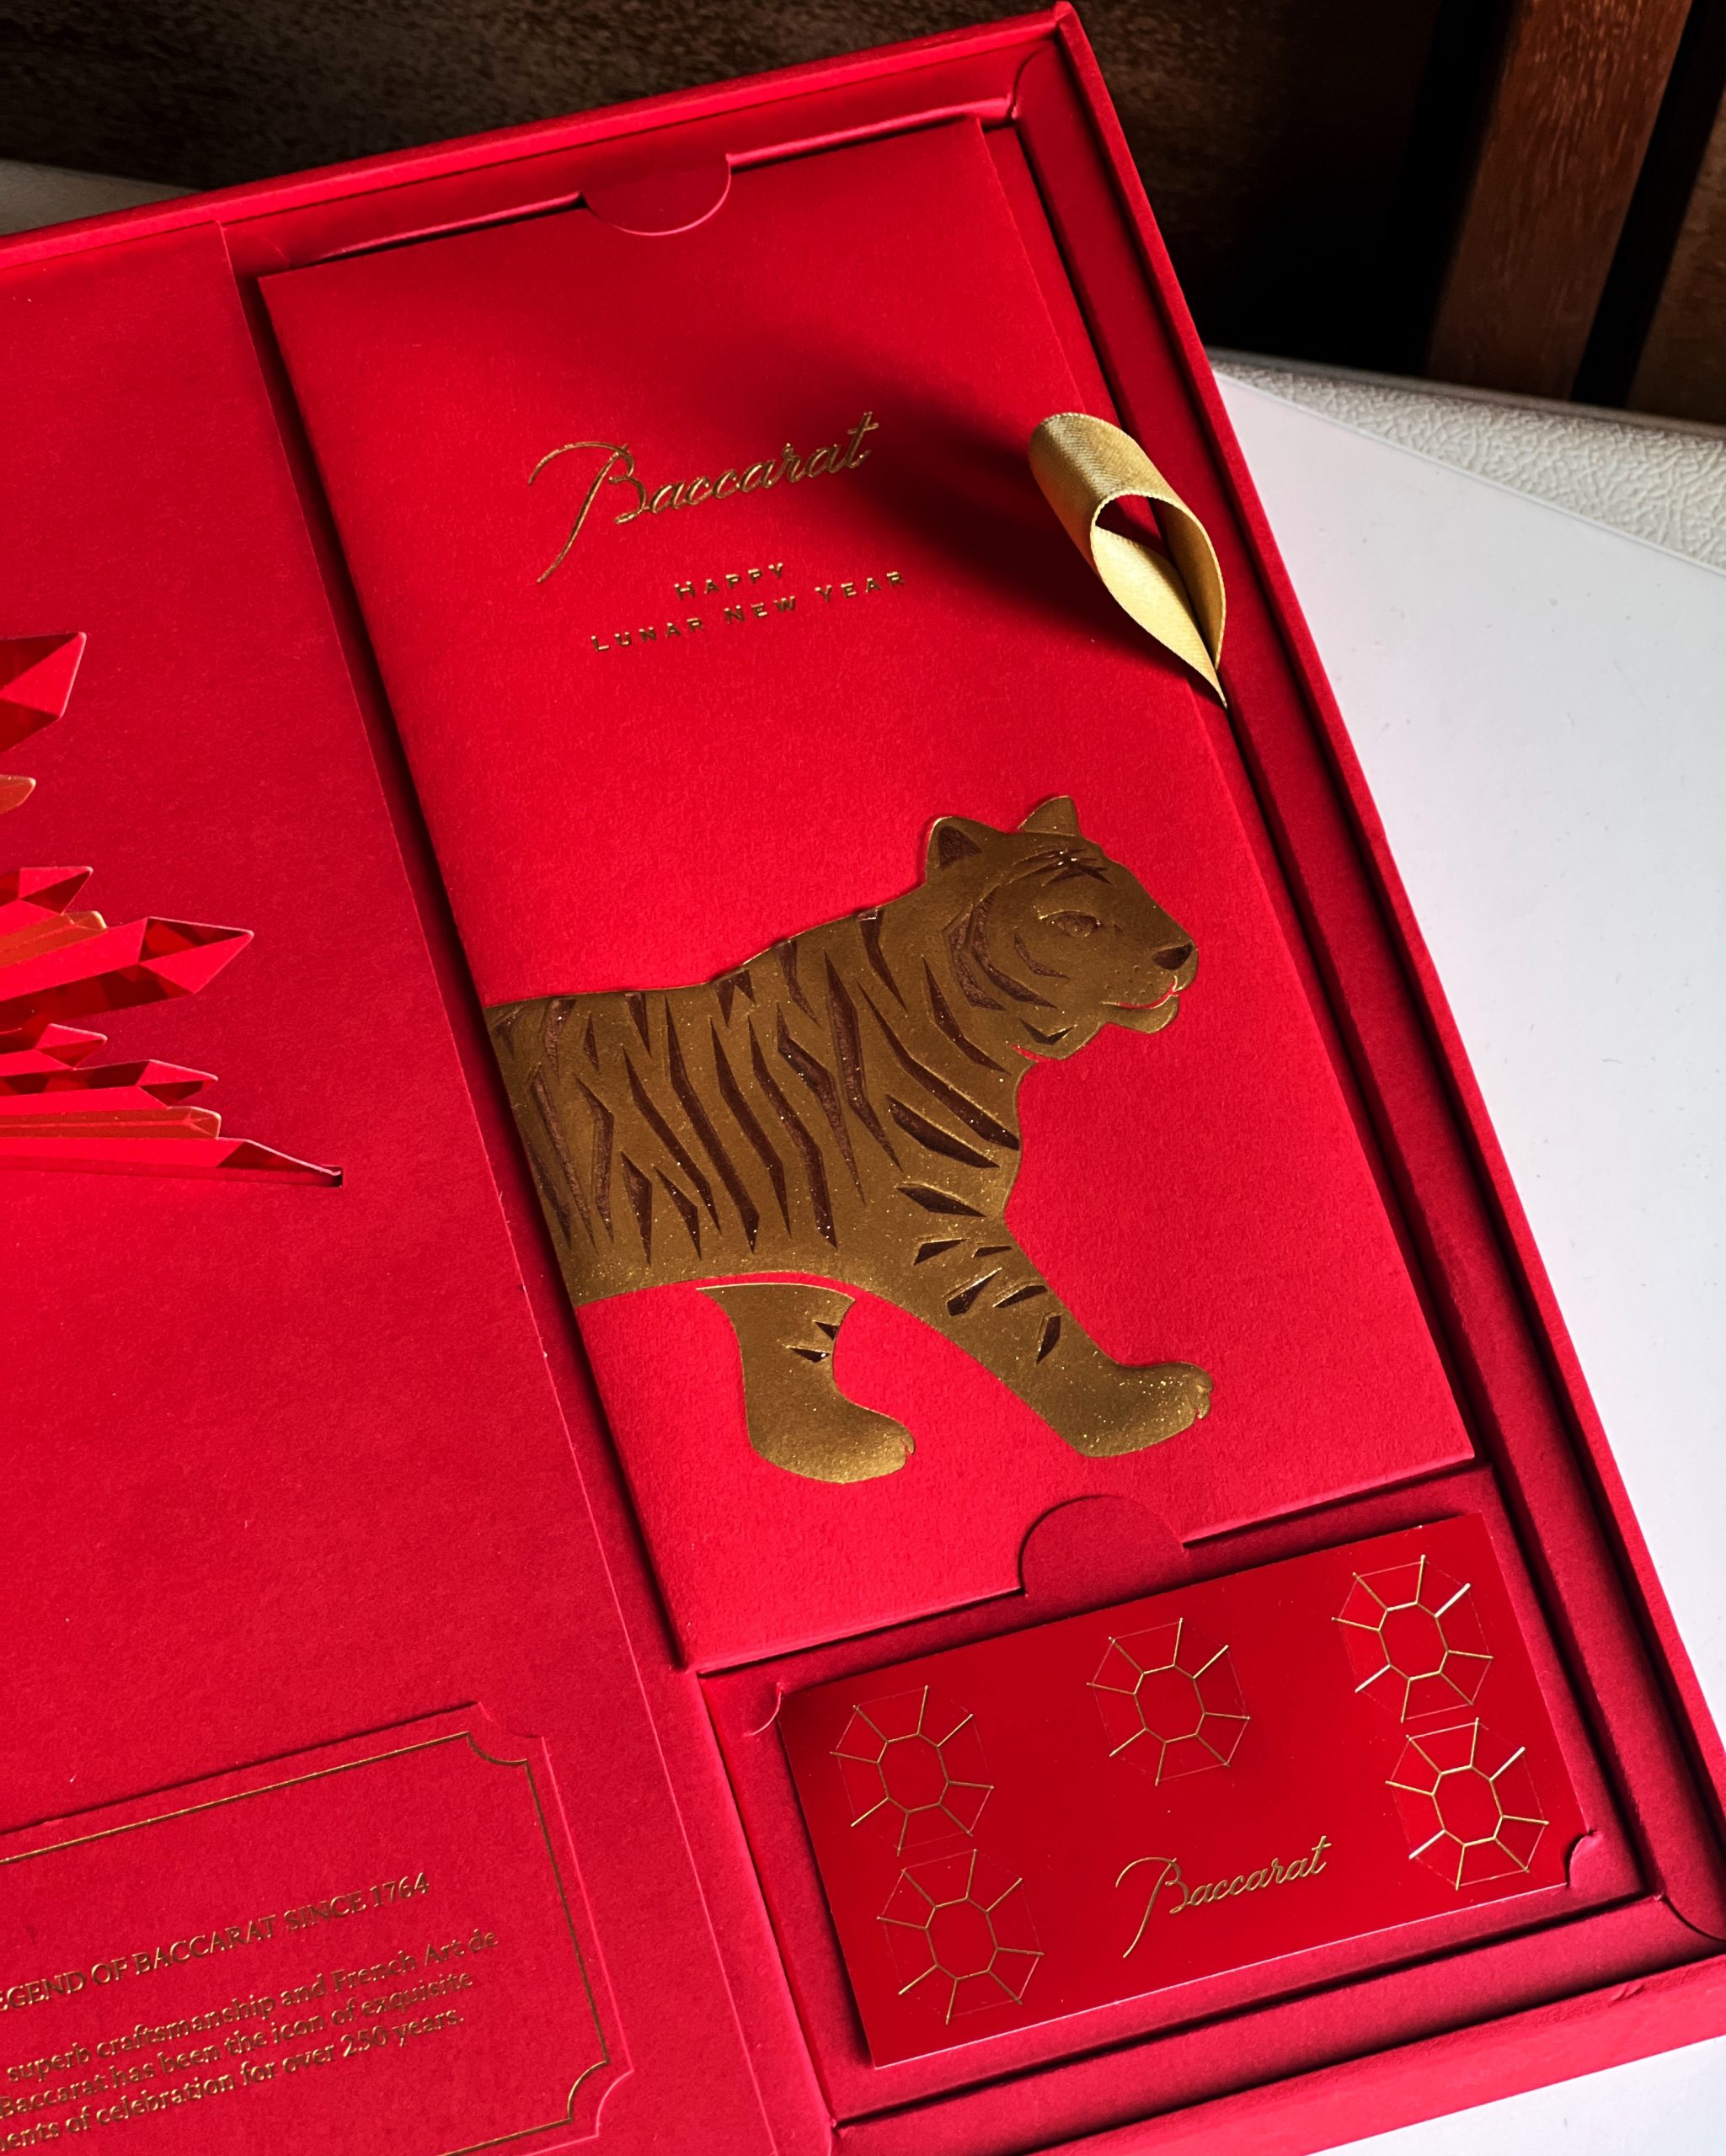 Red packets galore! What inspired these designs?